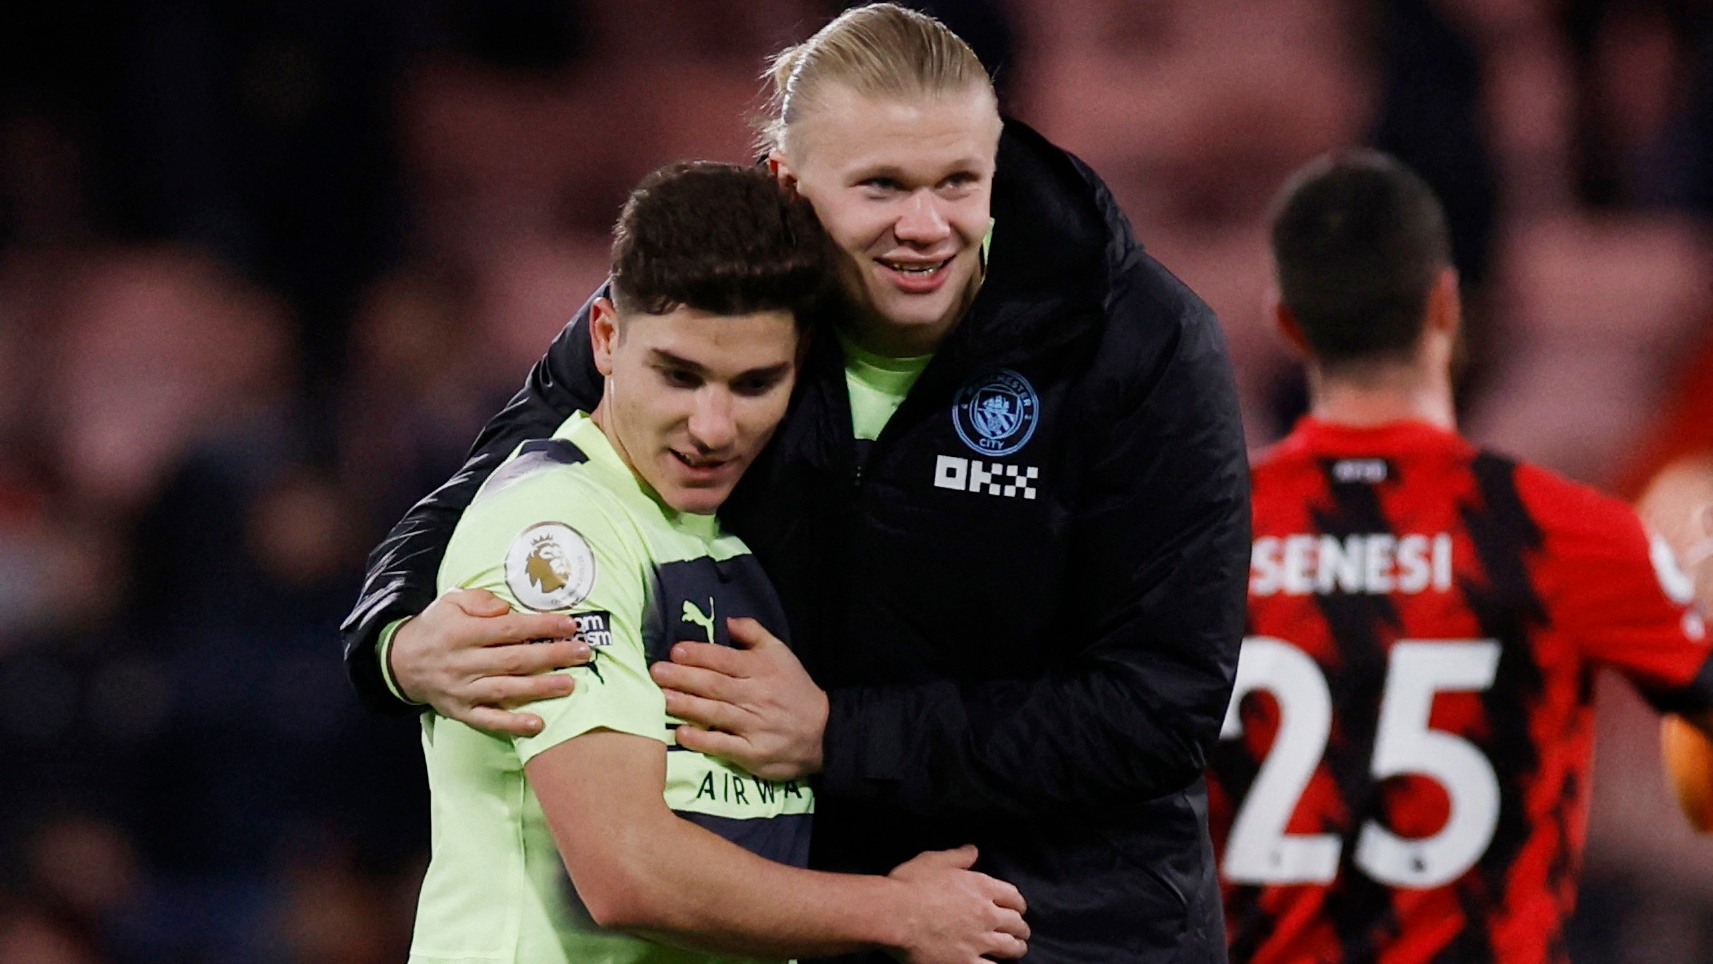 Soccer Football - Premier League - AFC Bournemouth v Manchester City - Vitality Stadium, Bournemouth, Britain - February 25, 2023 Manchester City's Julian Alvarez and Erling Braut Haaland celebrate after the match Action Images via Reuters/Andrew Couldridge EDITORIAL USE ONLY. No use with unauthorized audio, video, data, fixture lists, club/league logos or 'live' services. Online in-match use limited to 75 images, no video emulation. No use in betting, games or single club /league/player publications.  Please contact your account representative for further details.